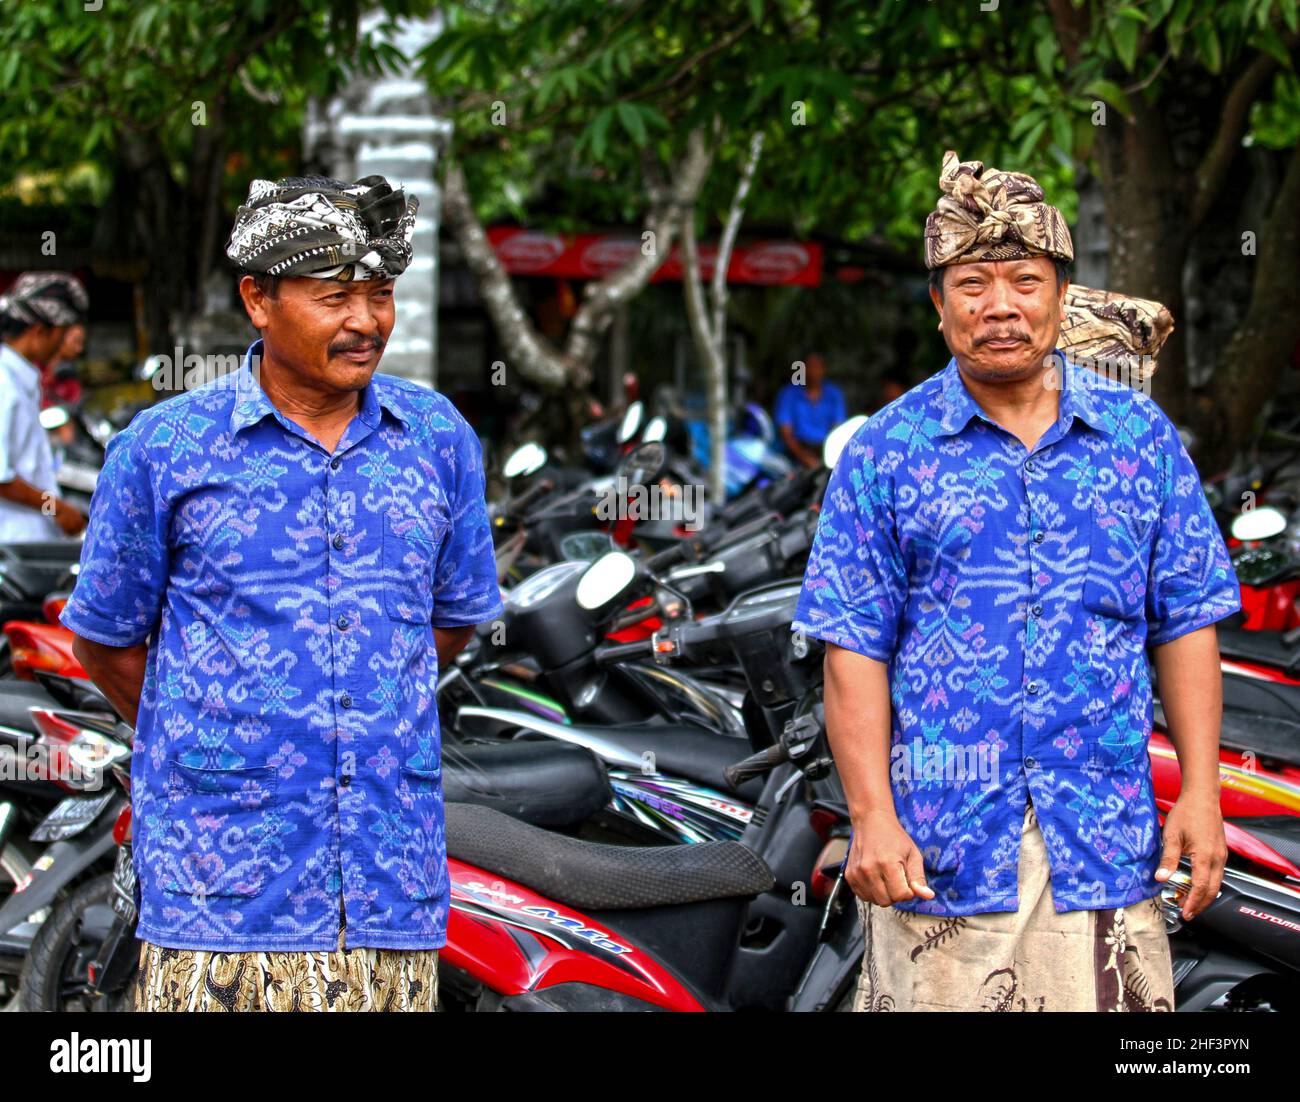 Village seniors dressed in blue batik shirts and batik udeng headwear at a ceremony taking place in the village of Ketewel in Gianyar, Bali, Indonesia Stock Photo